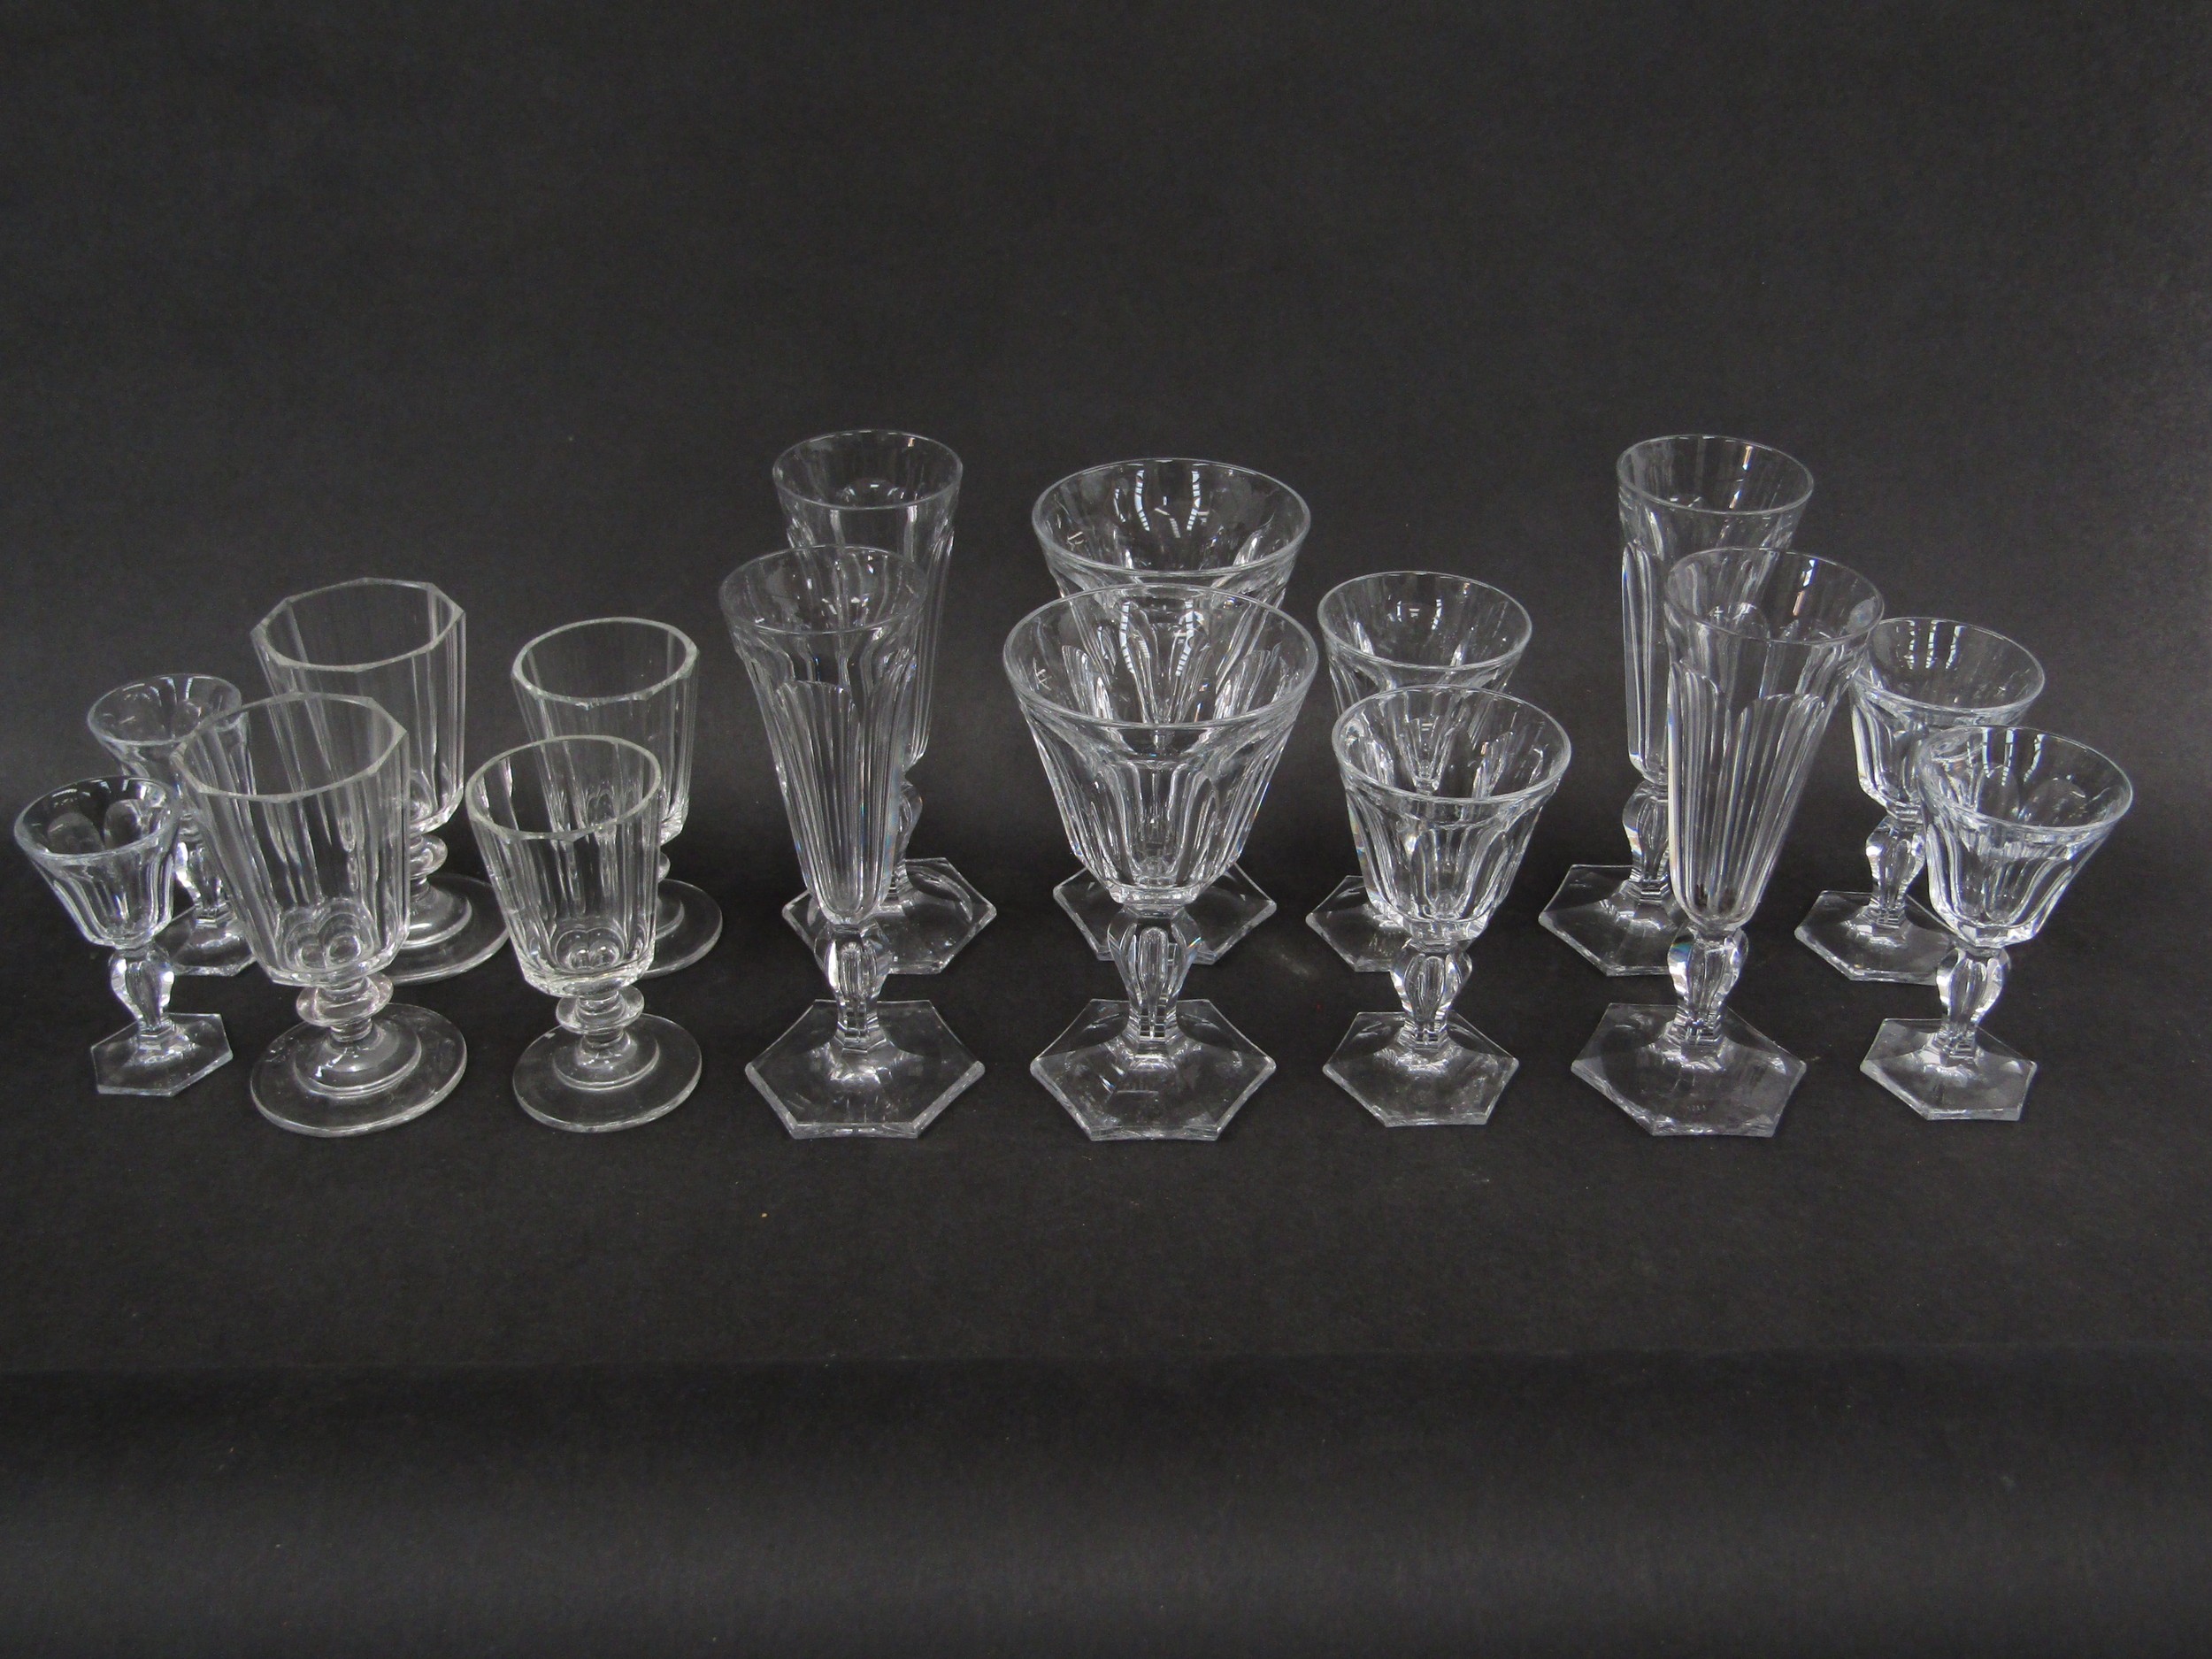 A large quantity of handblown glasses originally from the Essenburg Castle. The two part sets were